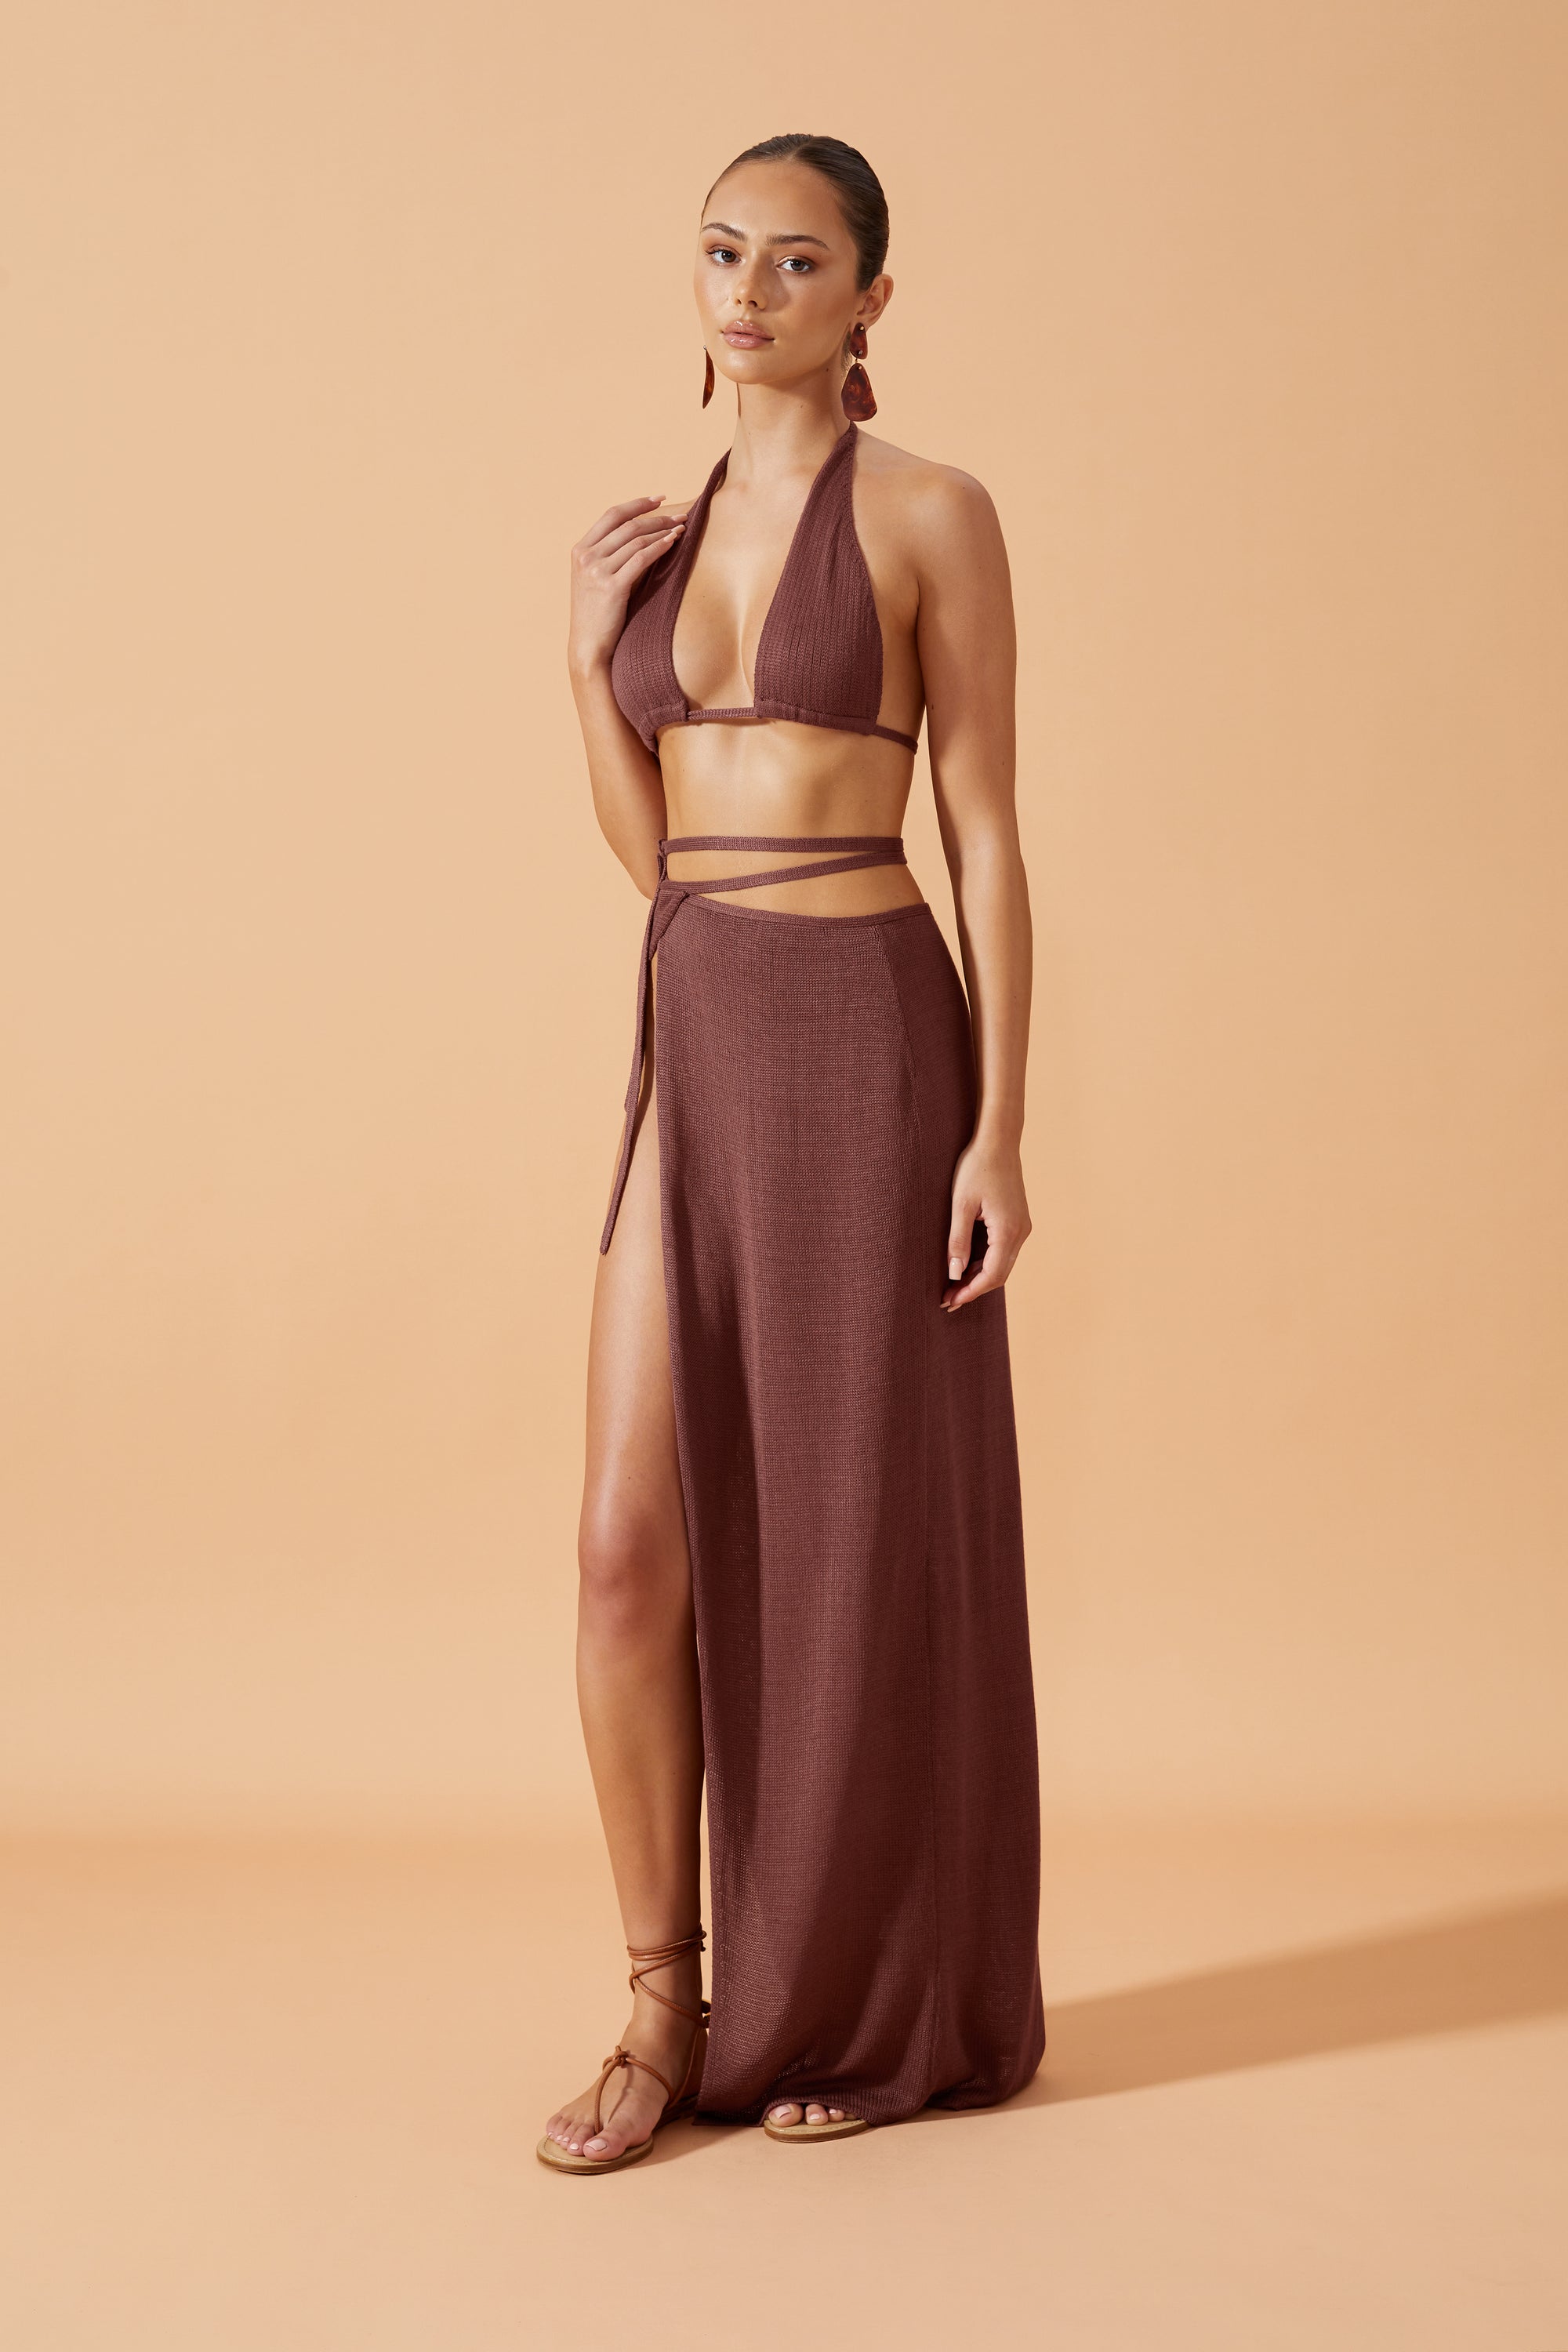 Flook The Label Zula Knitted Triangle Top in Coconut husk. Matched with Zula Knitted Maxi Wrap Skirt. Front View. 